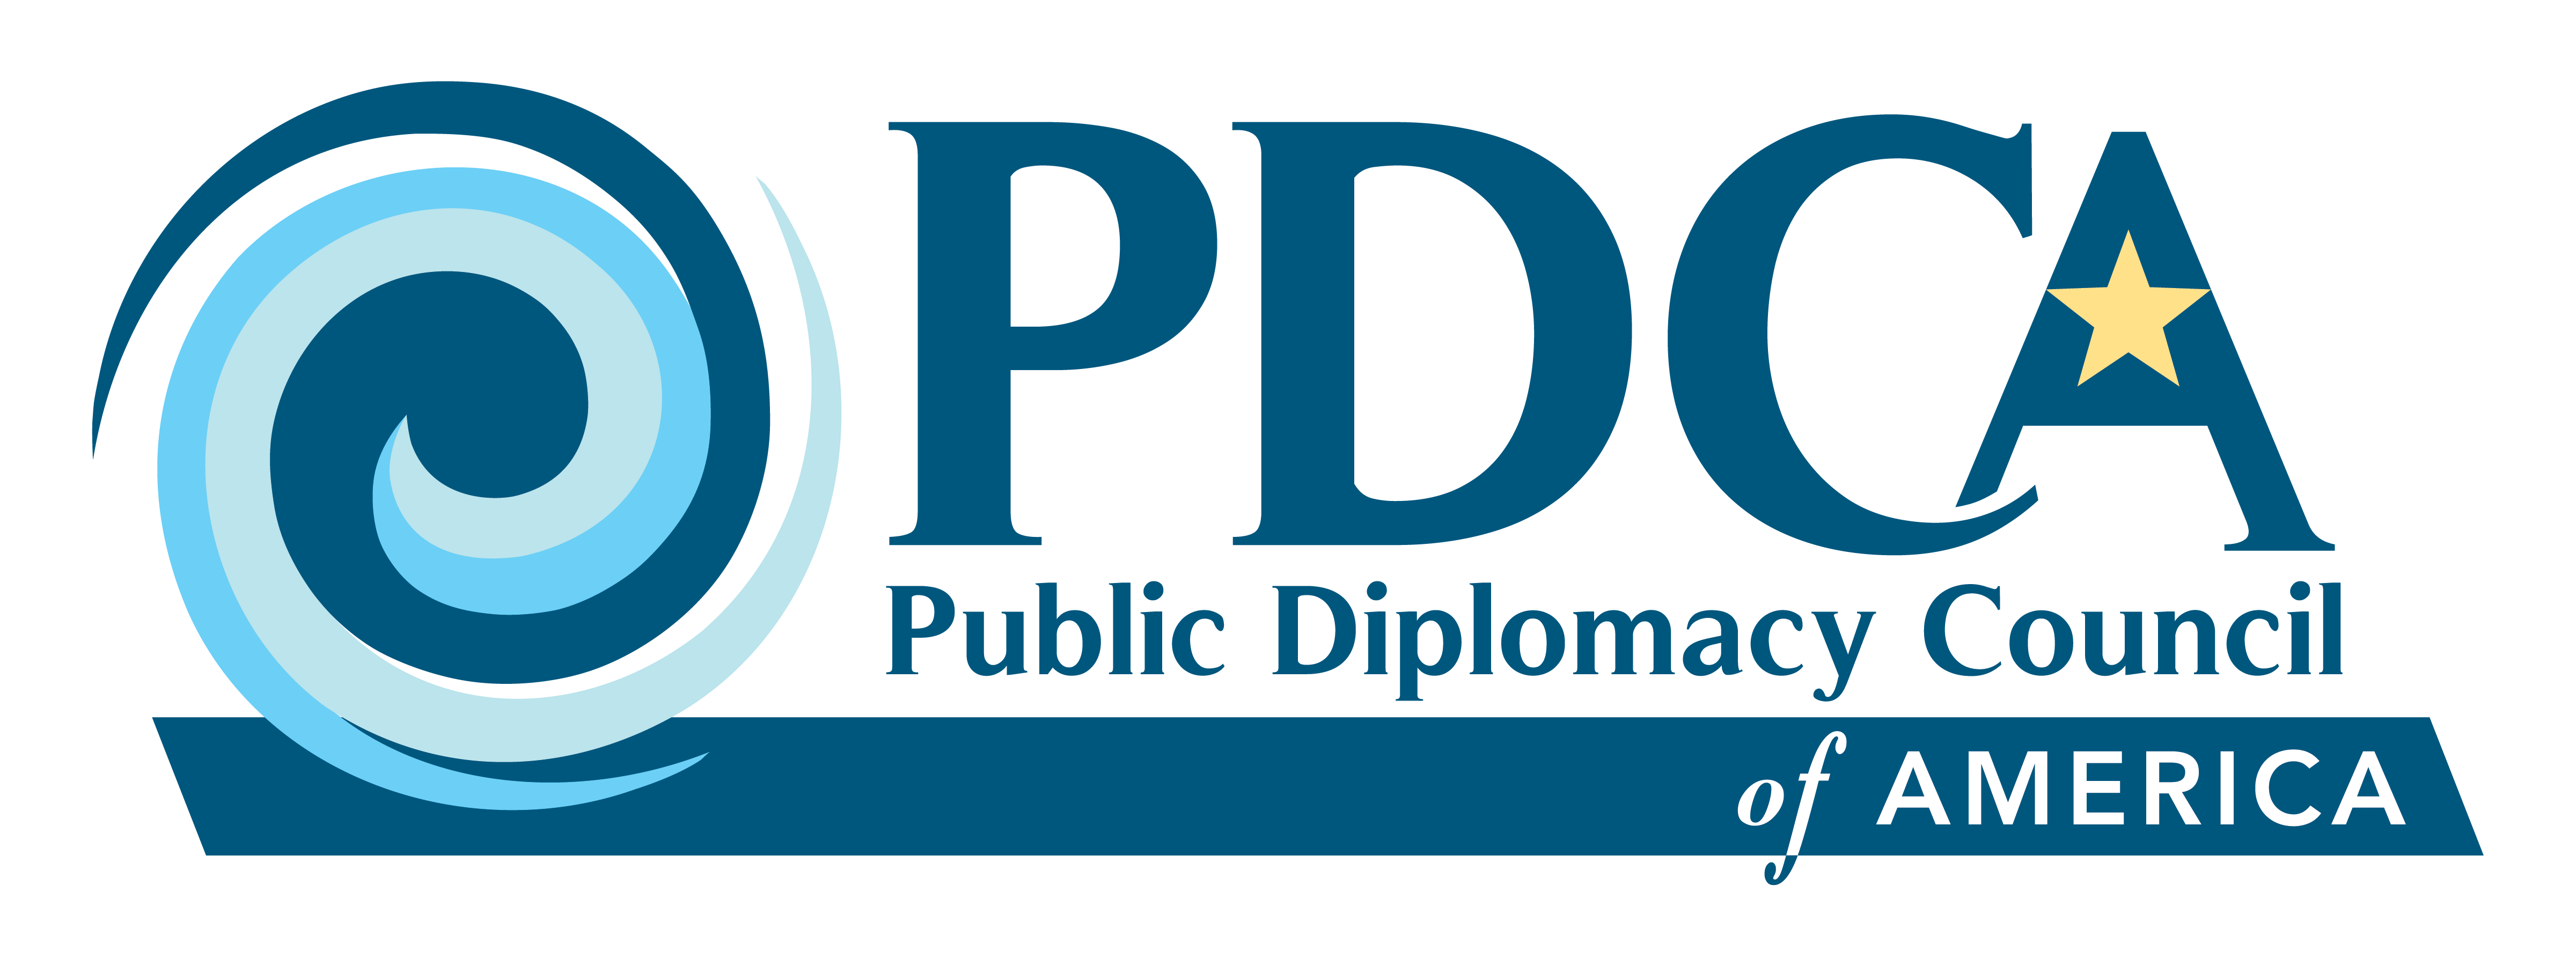 Logo of the Public Diplomacy Council of America